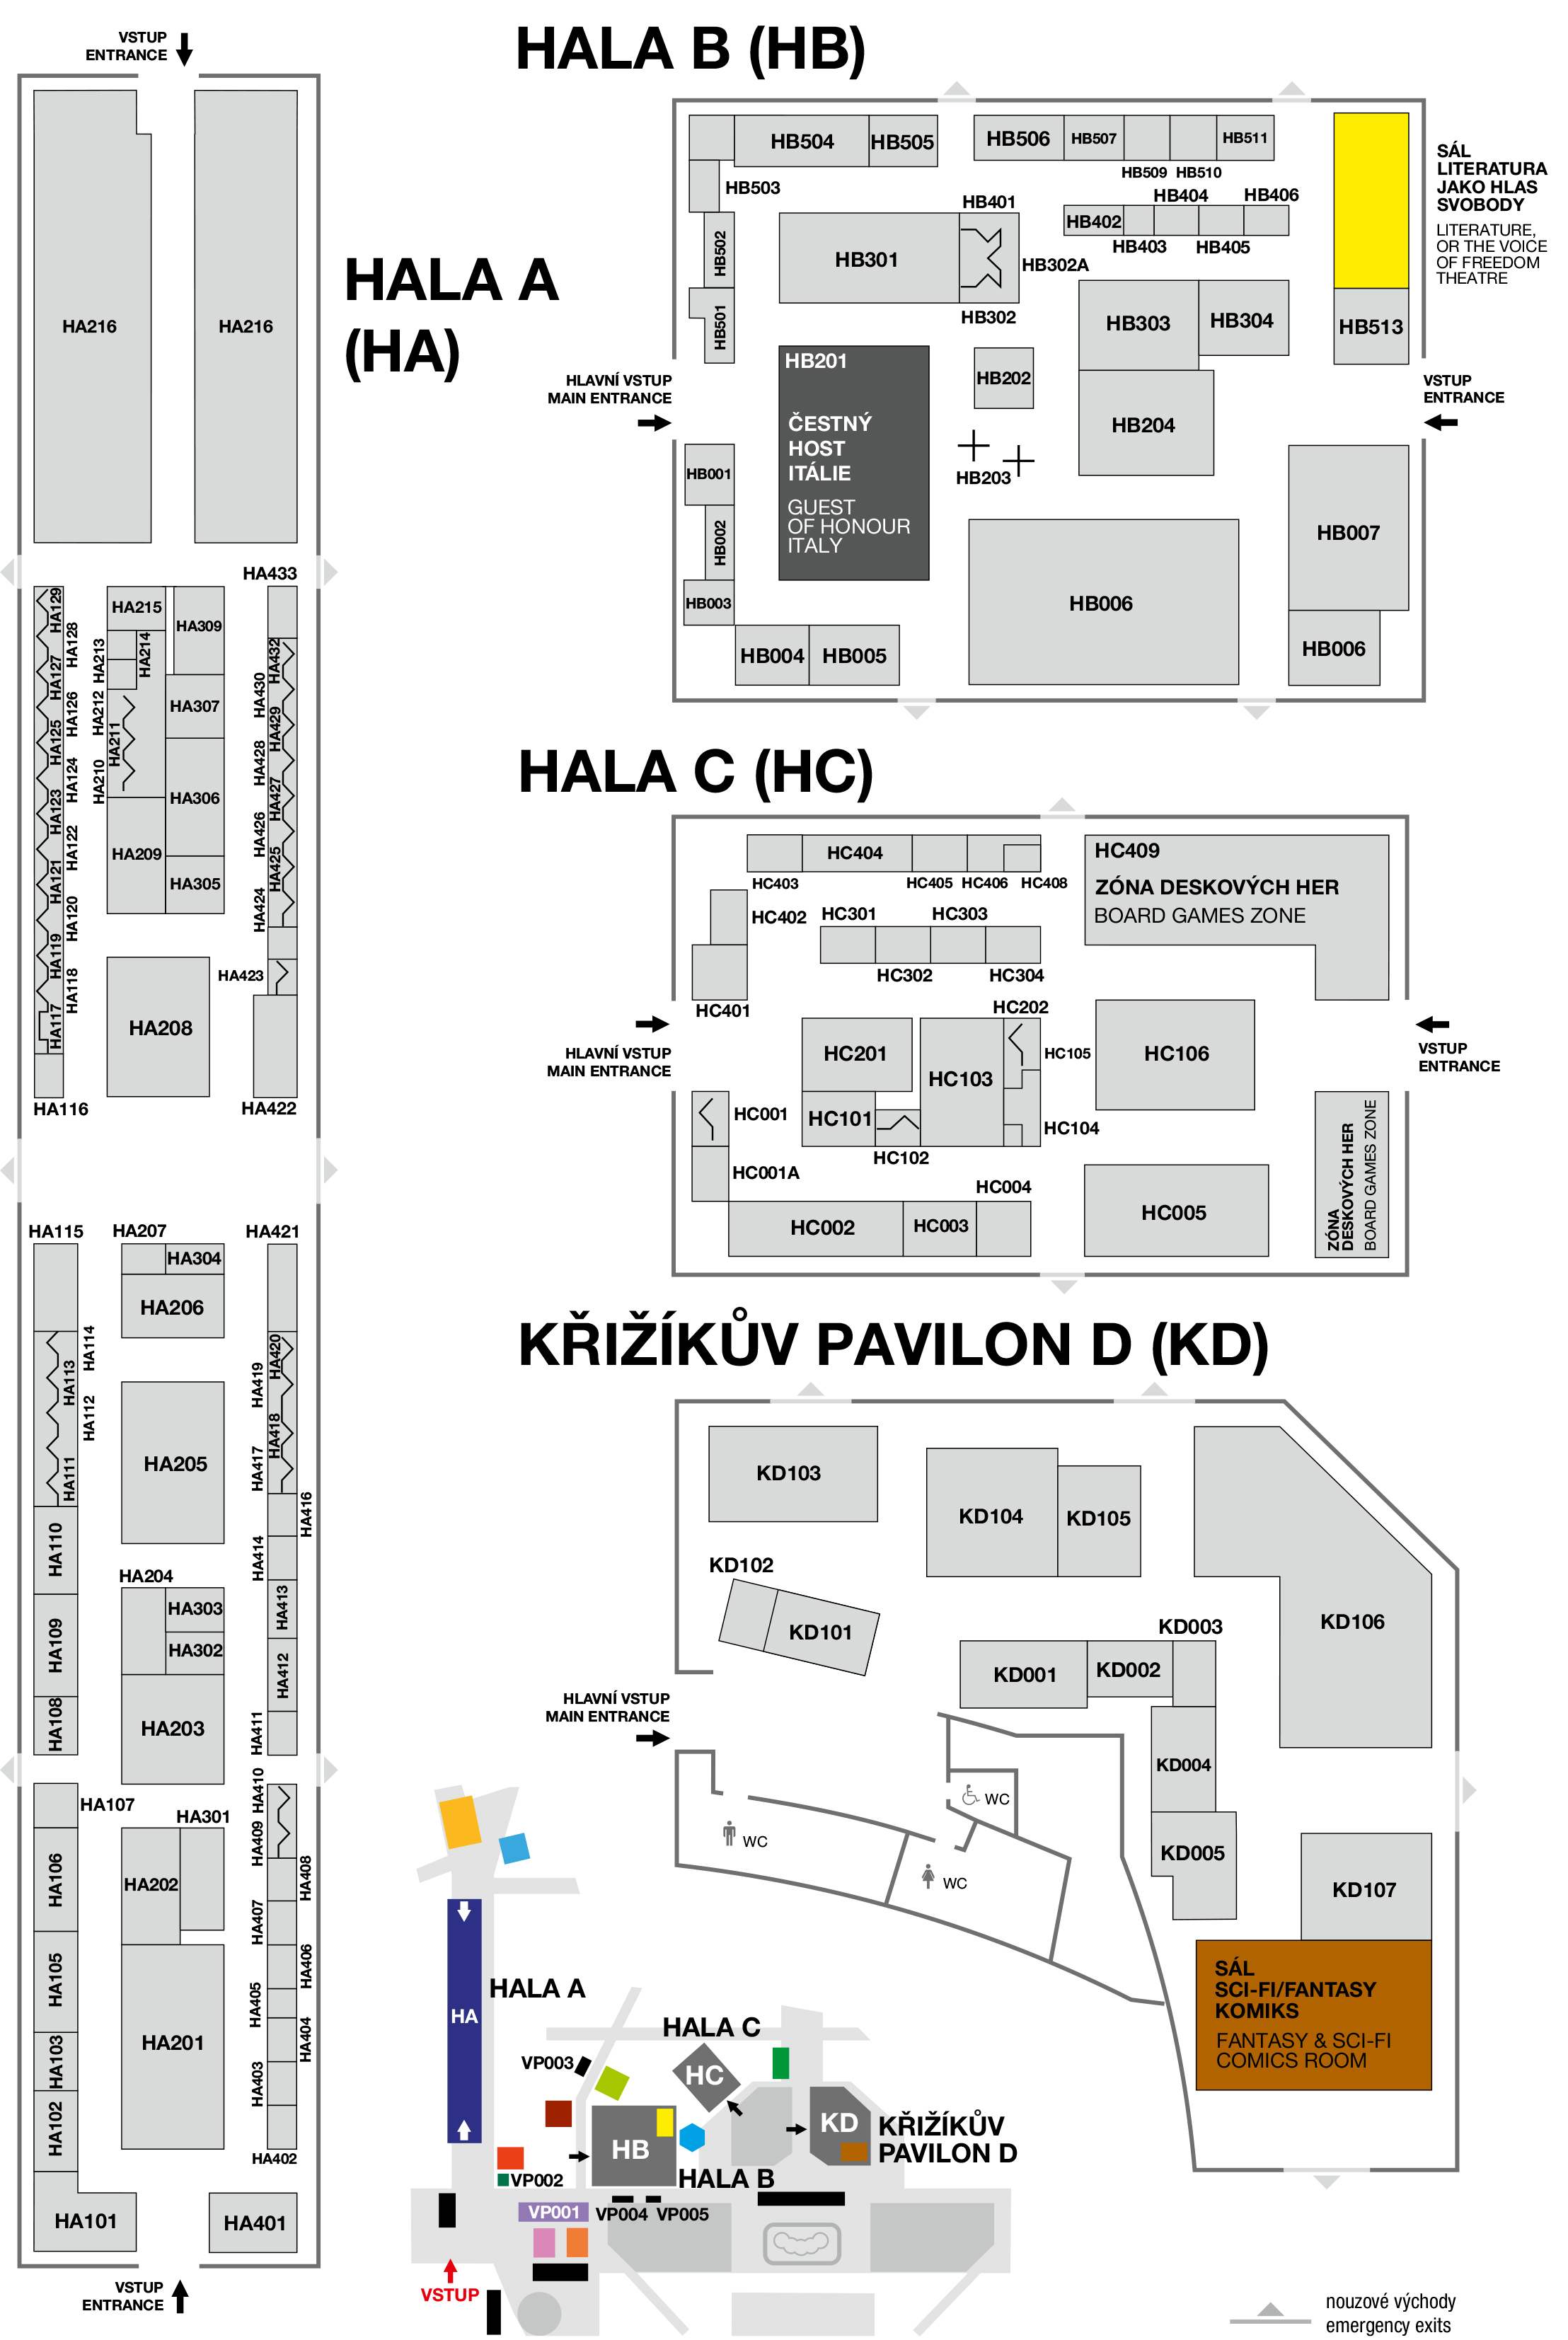 Layout of the Exhibition Stands